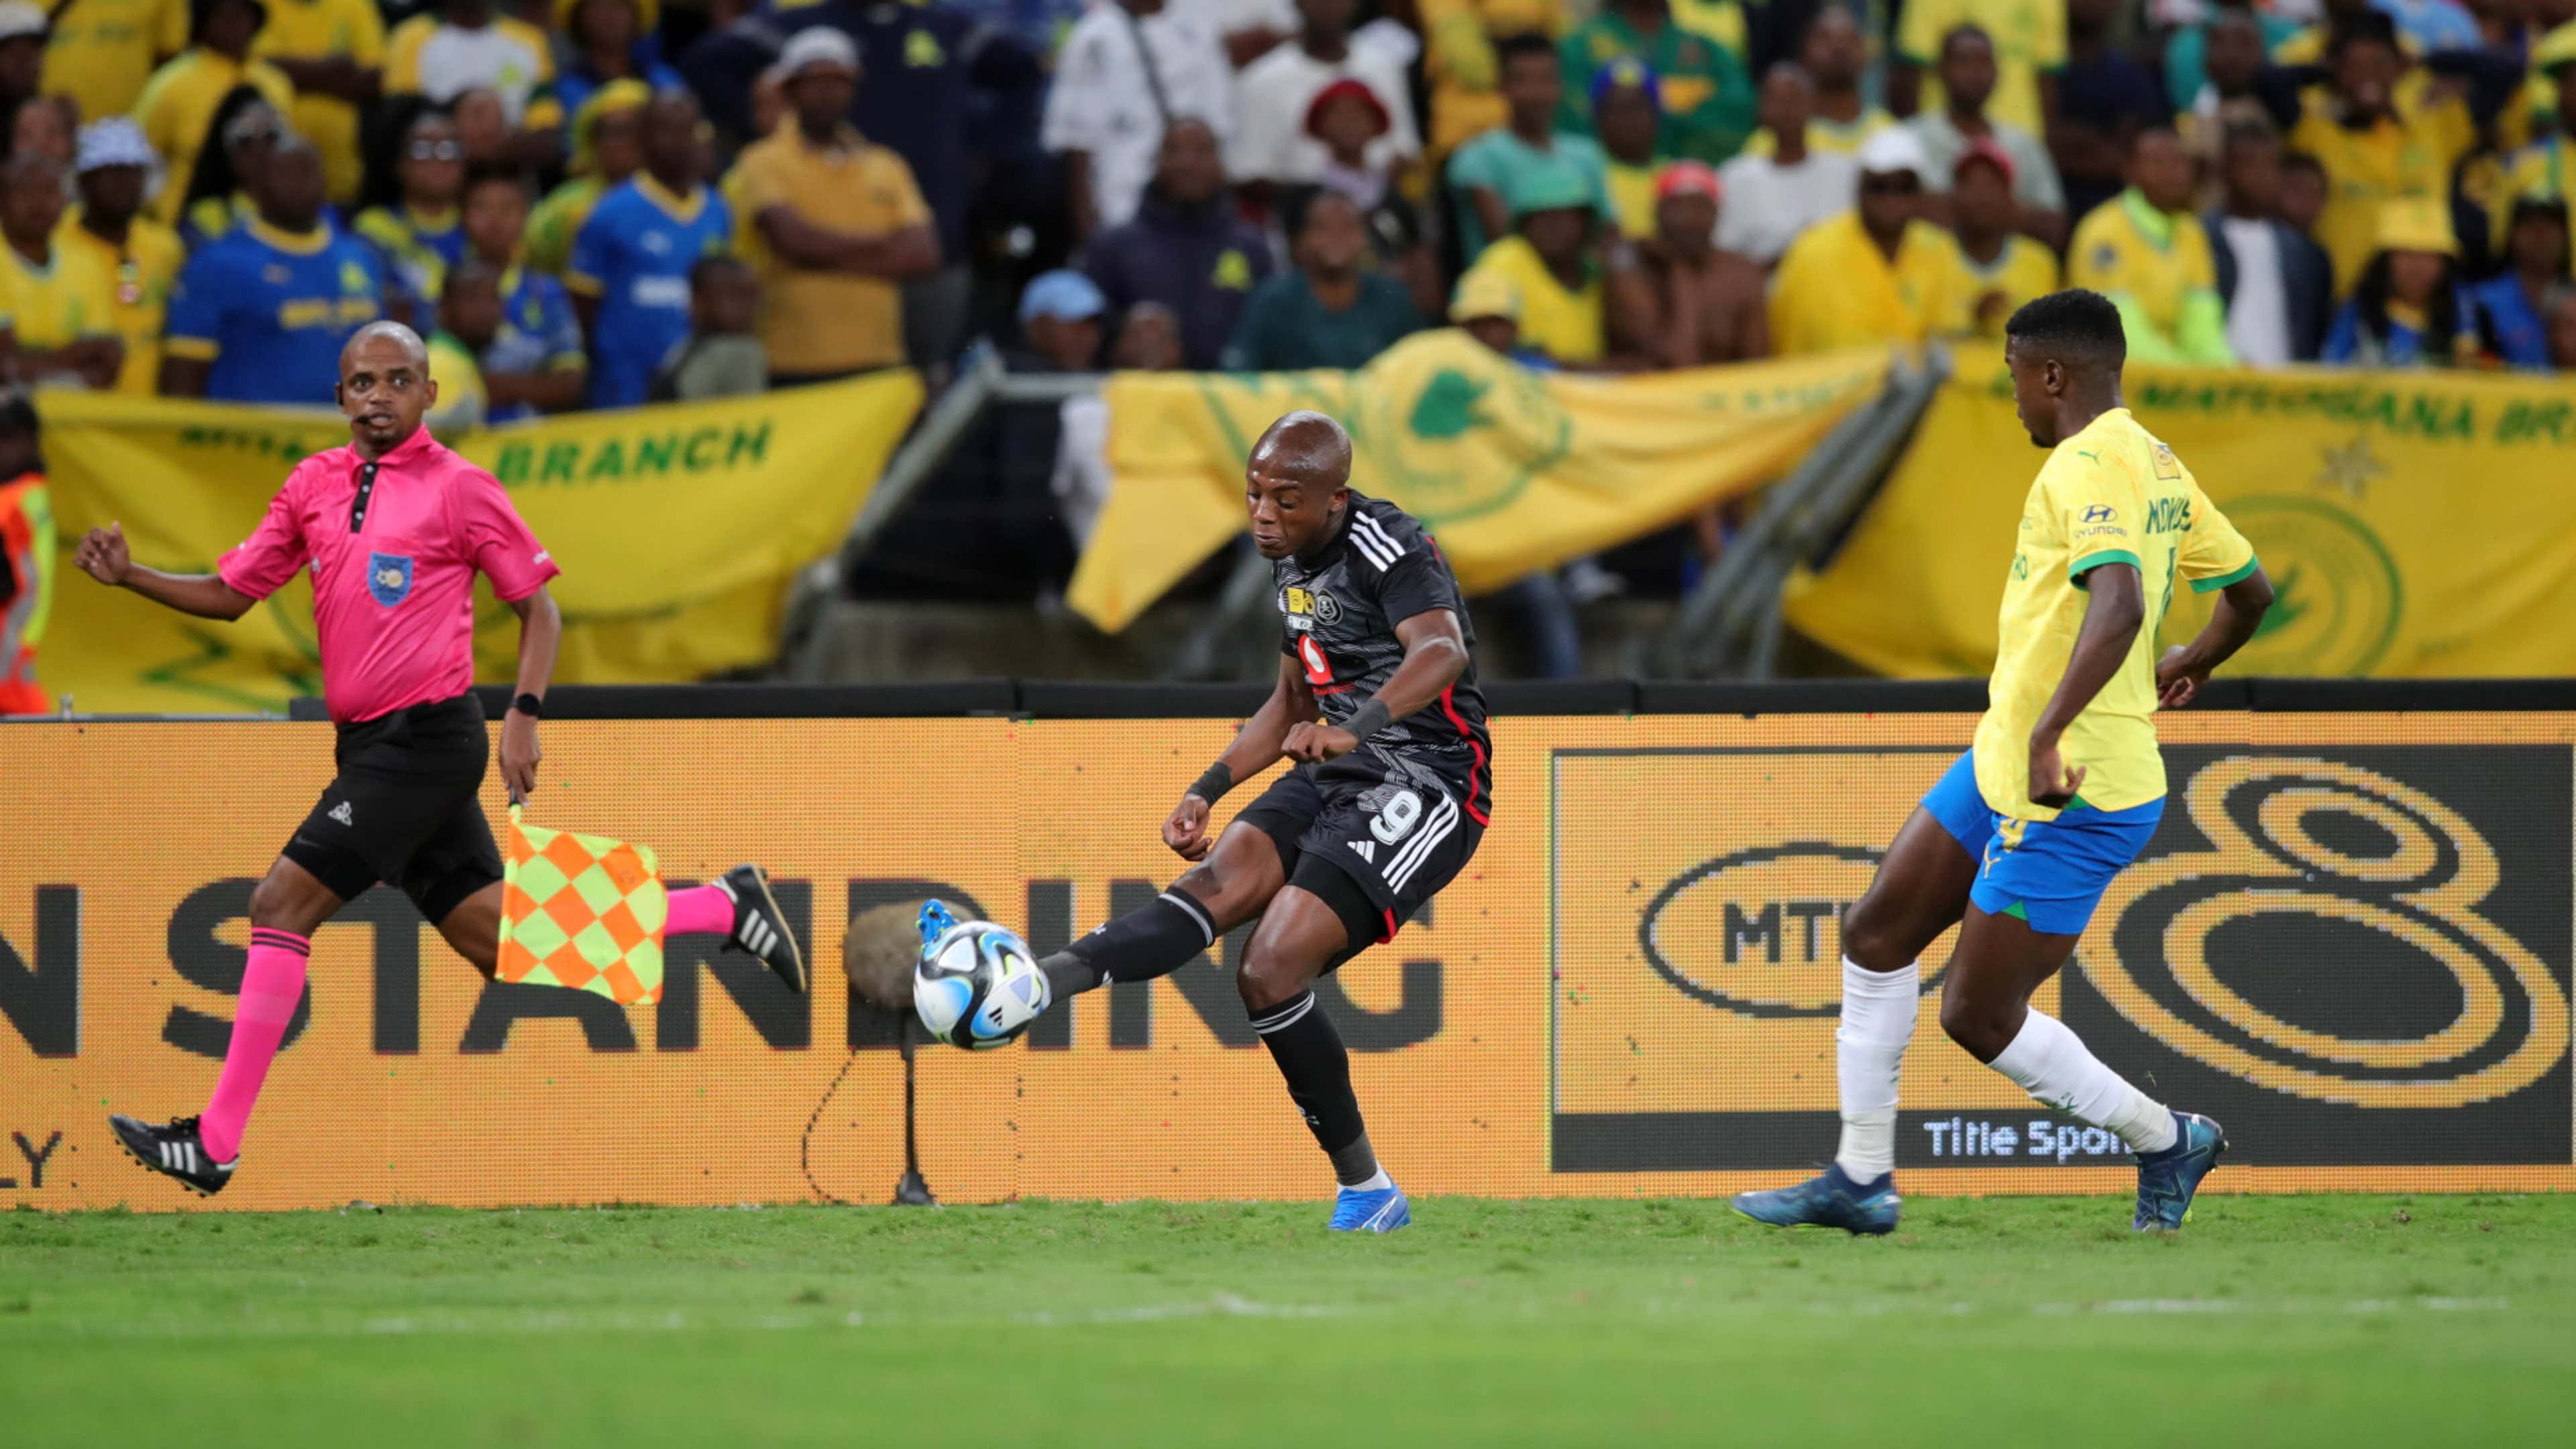 Brown envelope didn't work, no win for Mamelodi Sundowns against Orlando  Pirates, but Kaizer Chiefs have had enough pain' - Fans